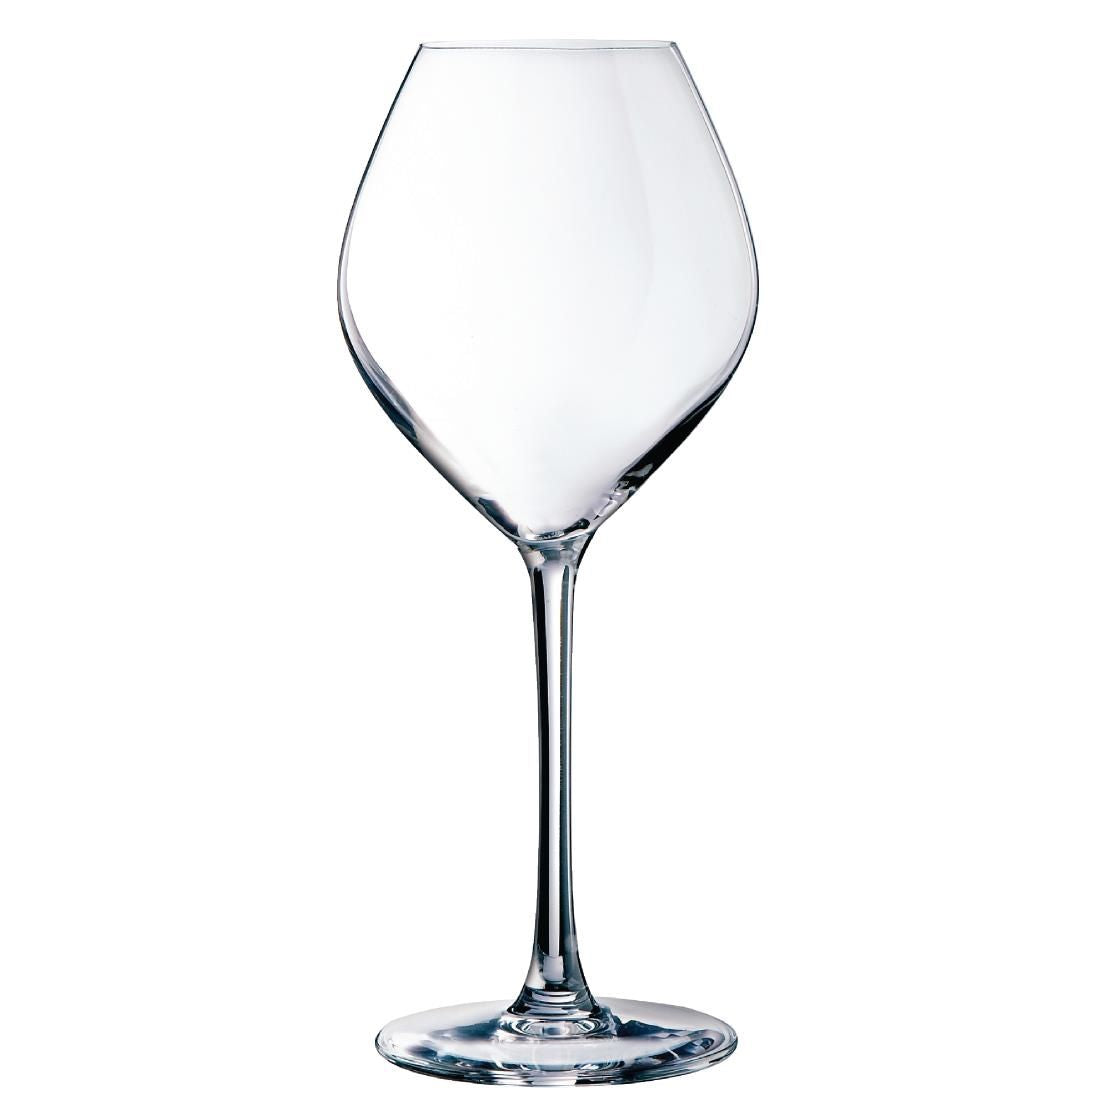 DH852 Arcoroc Grand Cepages Magnifique White Wine Glasses 350ml (Pack of 24) JD Catering Equipment Solutions Ltd